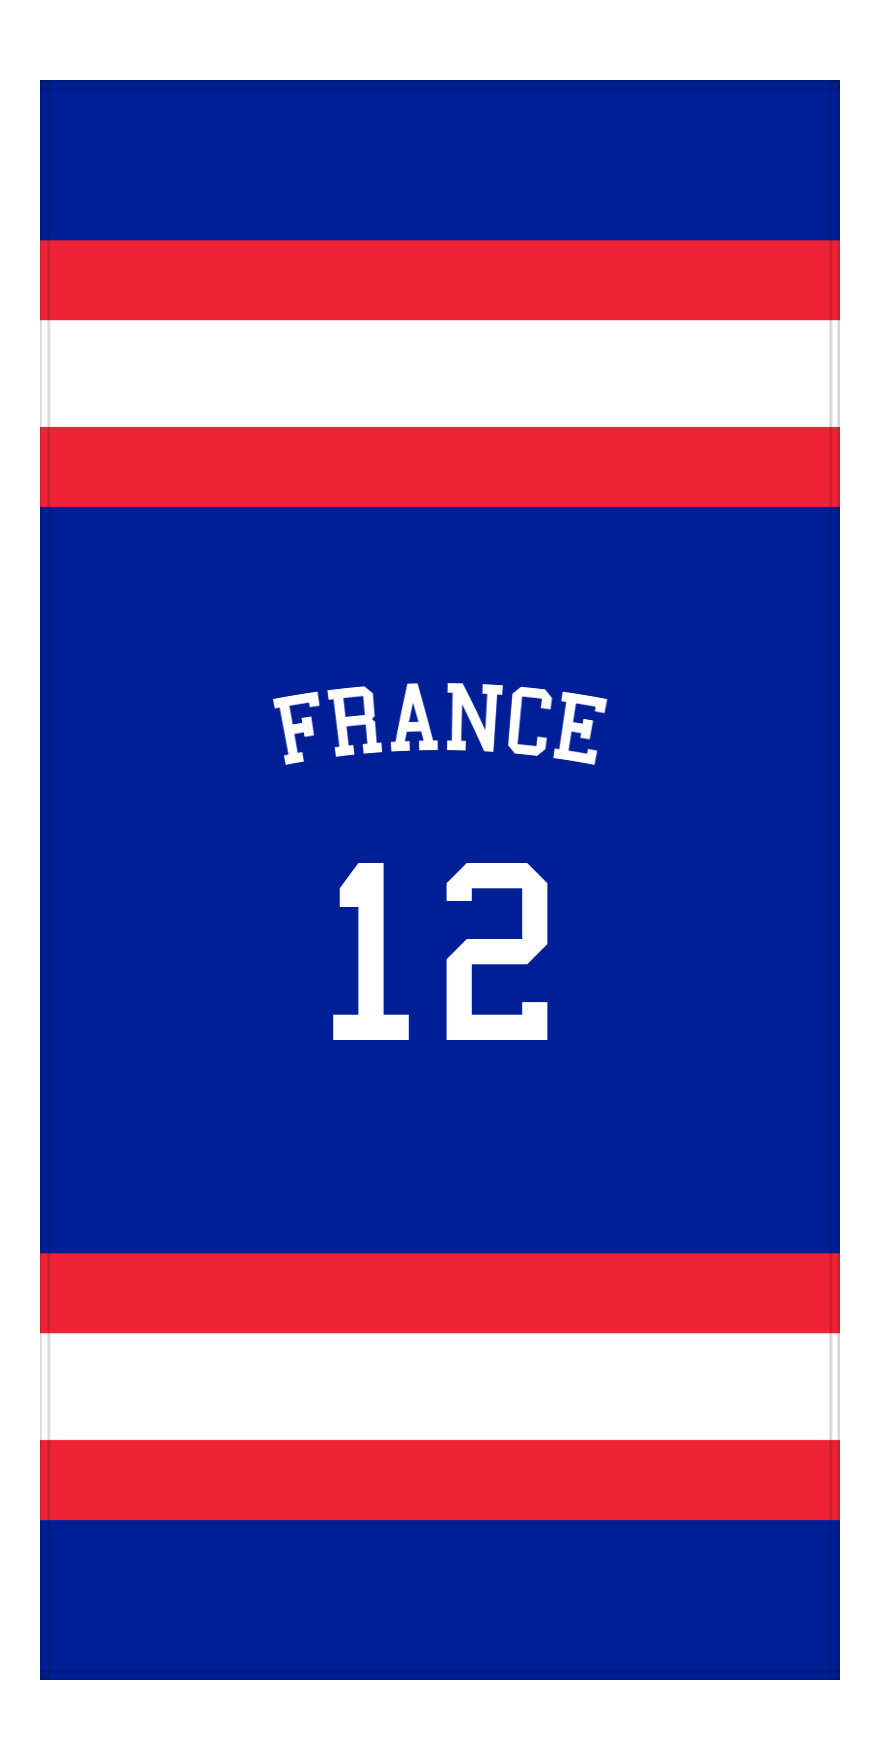 Personalized Jersey Number 1-on-1 Stripes Sports Beach Towel with Arched Name - France - Vertical Design - Front View